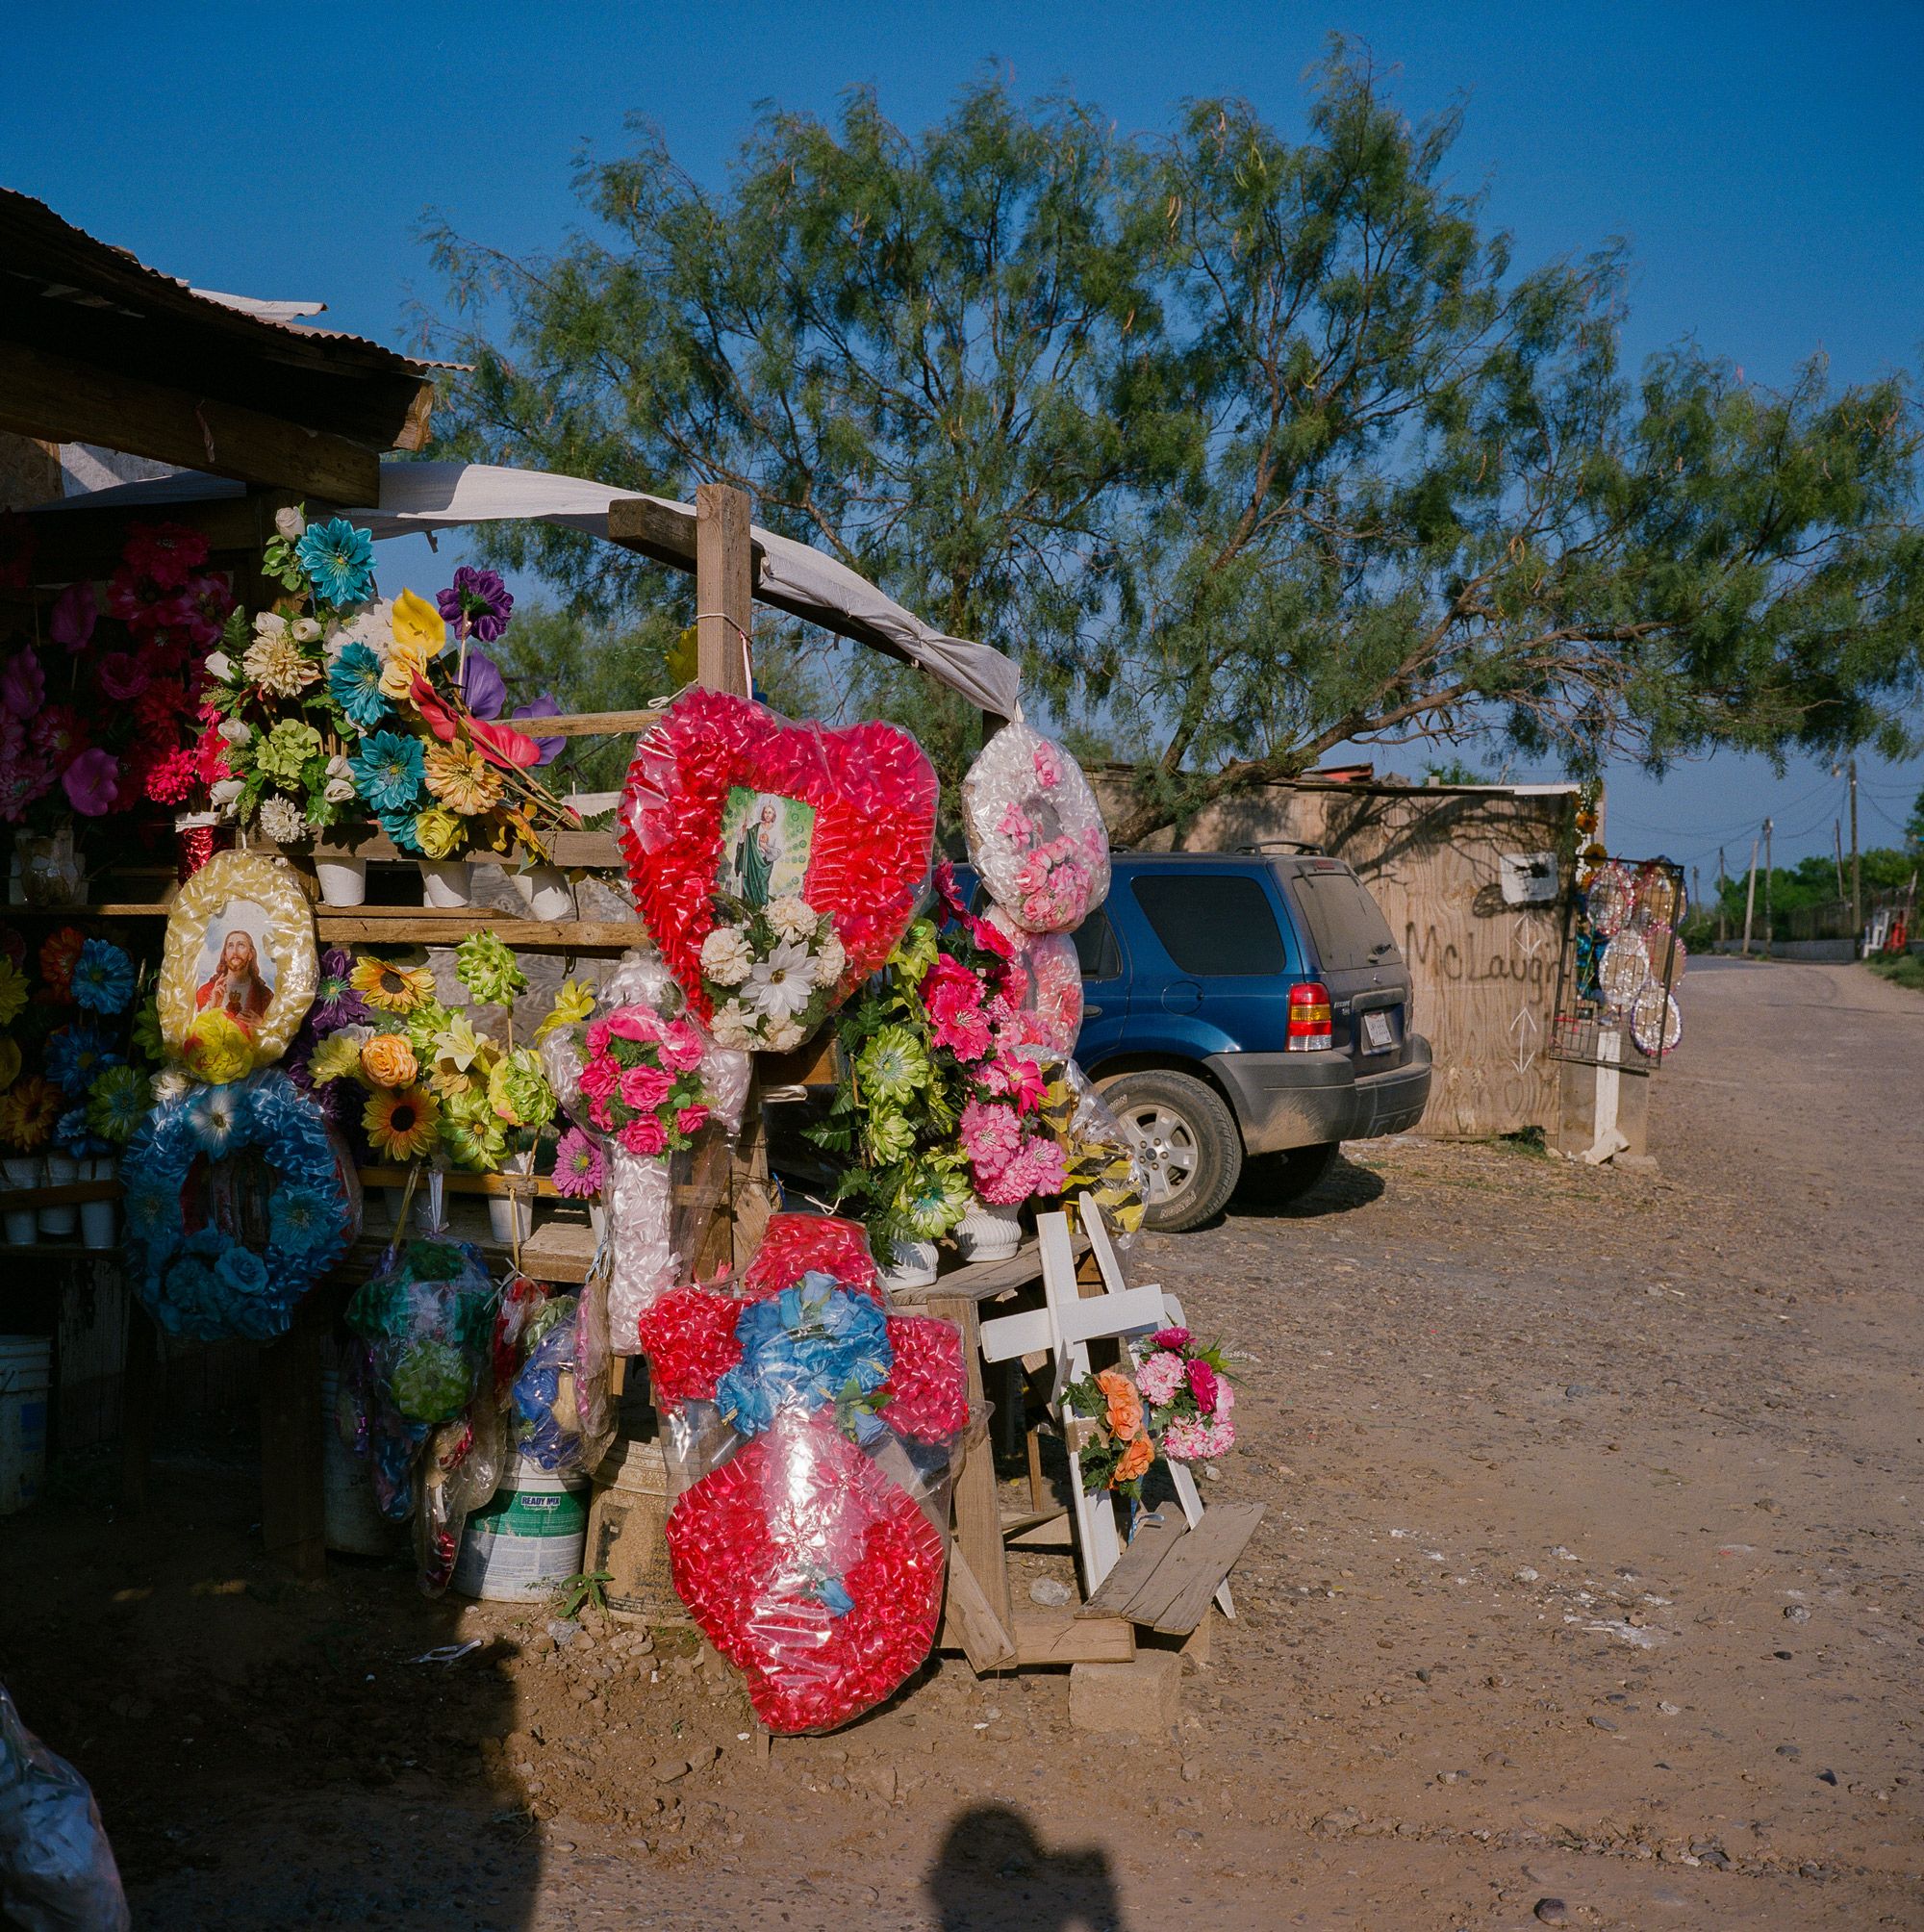 A flower stand is seen in September 2020 near the cemetery that houses the plot for Oscear Sineon Reyas Limas, who was killed by Mexican marines and whose body was found in the desert. Image by by Christopher Lee. Mexico, 2020.